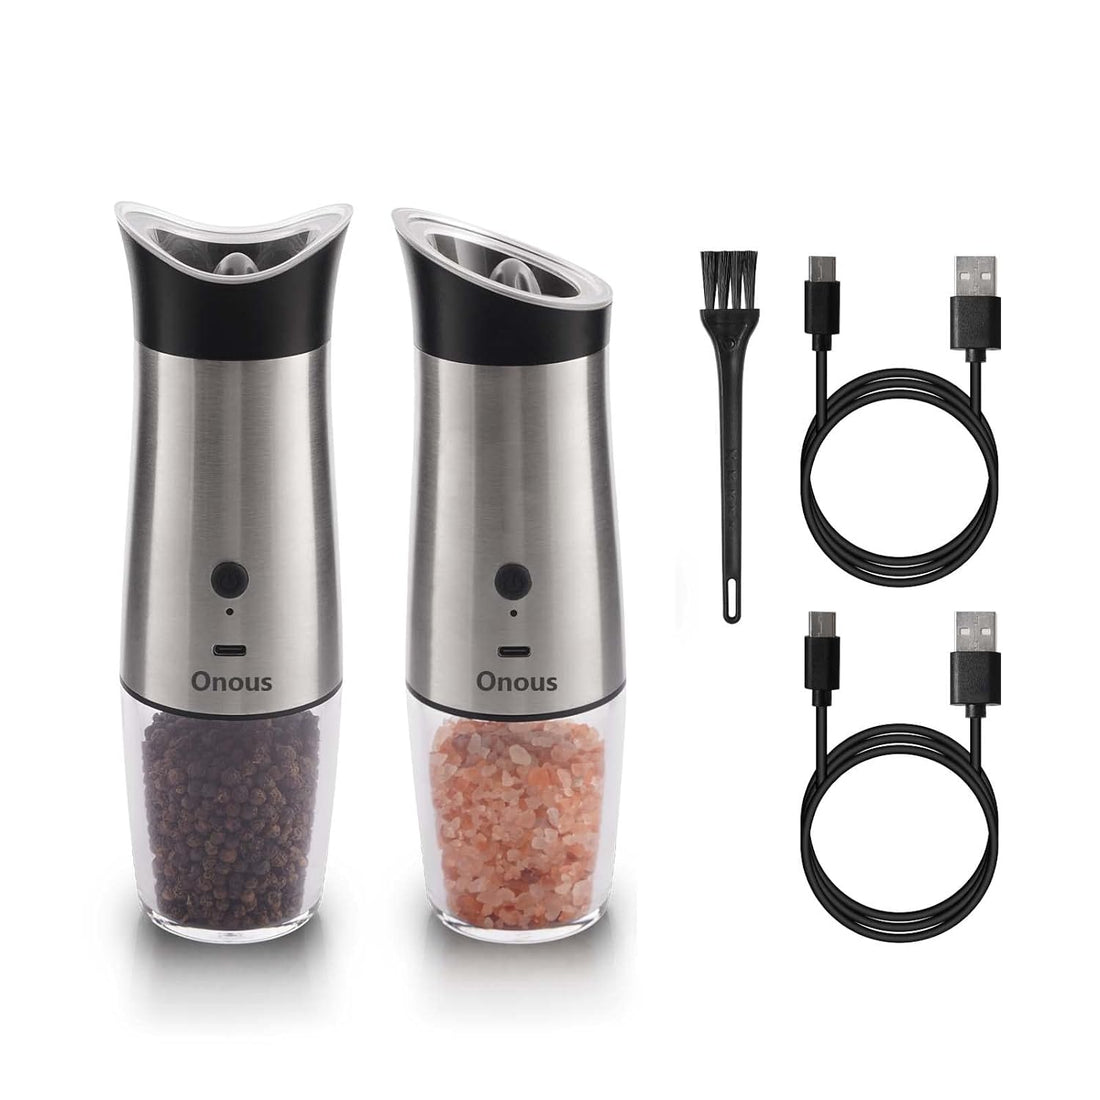 Electric Salt and Pepper Grinder Set, Onous Gravity Automatic Salt and Pepper Grinder Set Long Battery Life Pepper Mill Shakers, 2 Pack